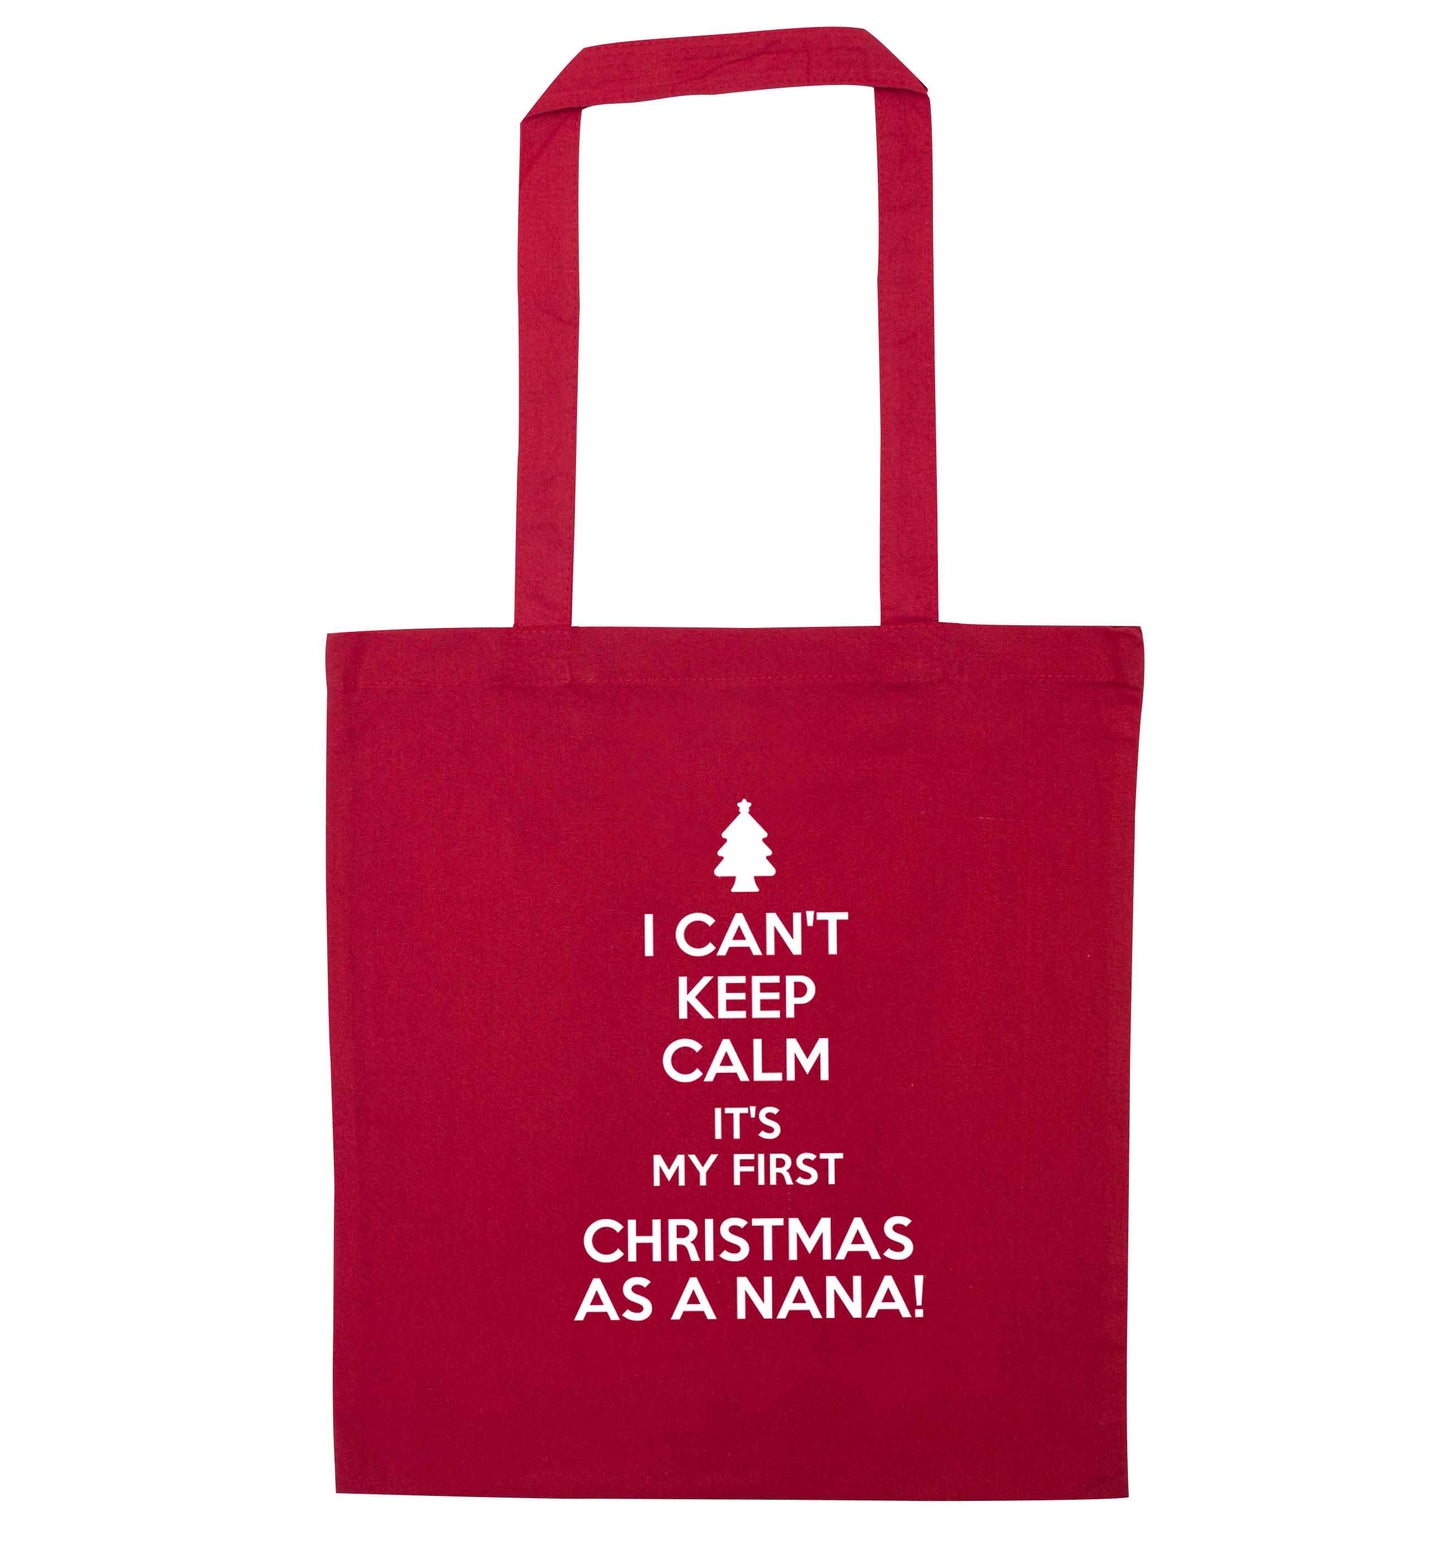 I can't keep calm it's my first Christmas as a nana! red tote bag